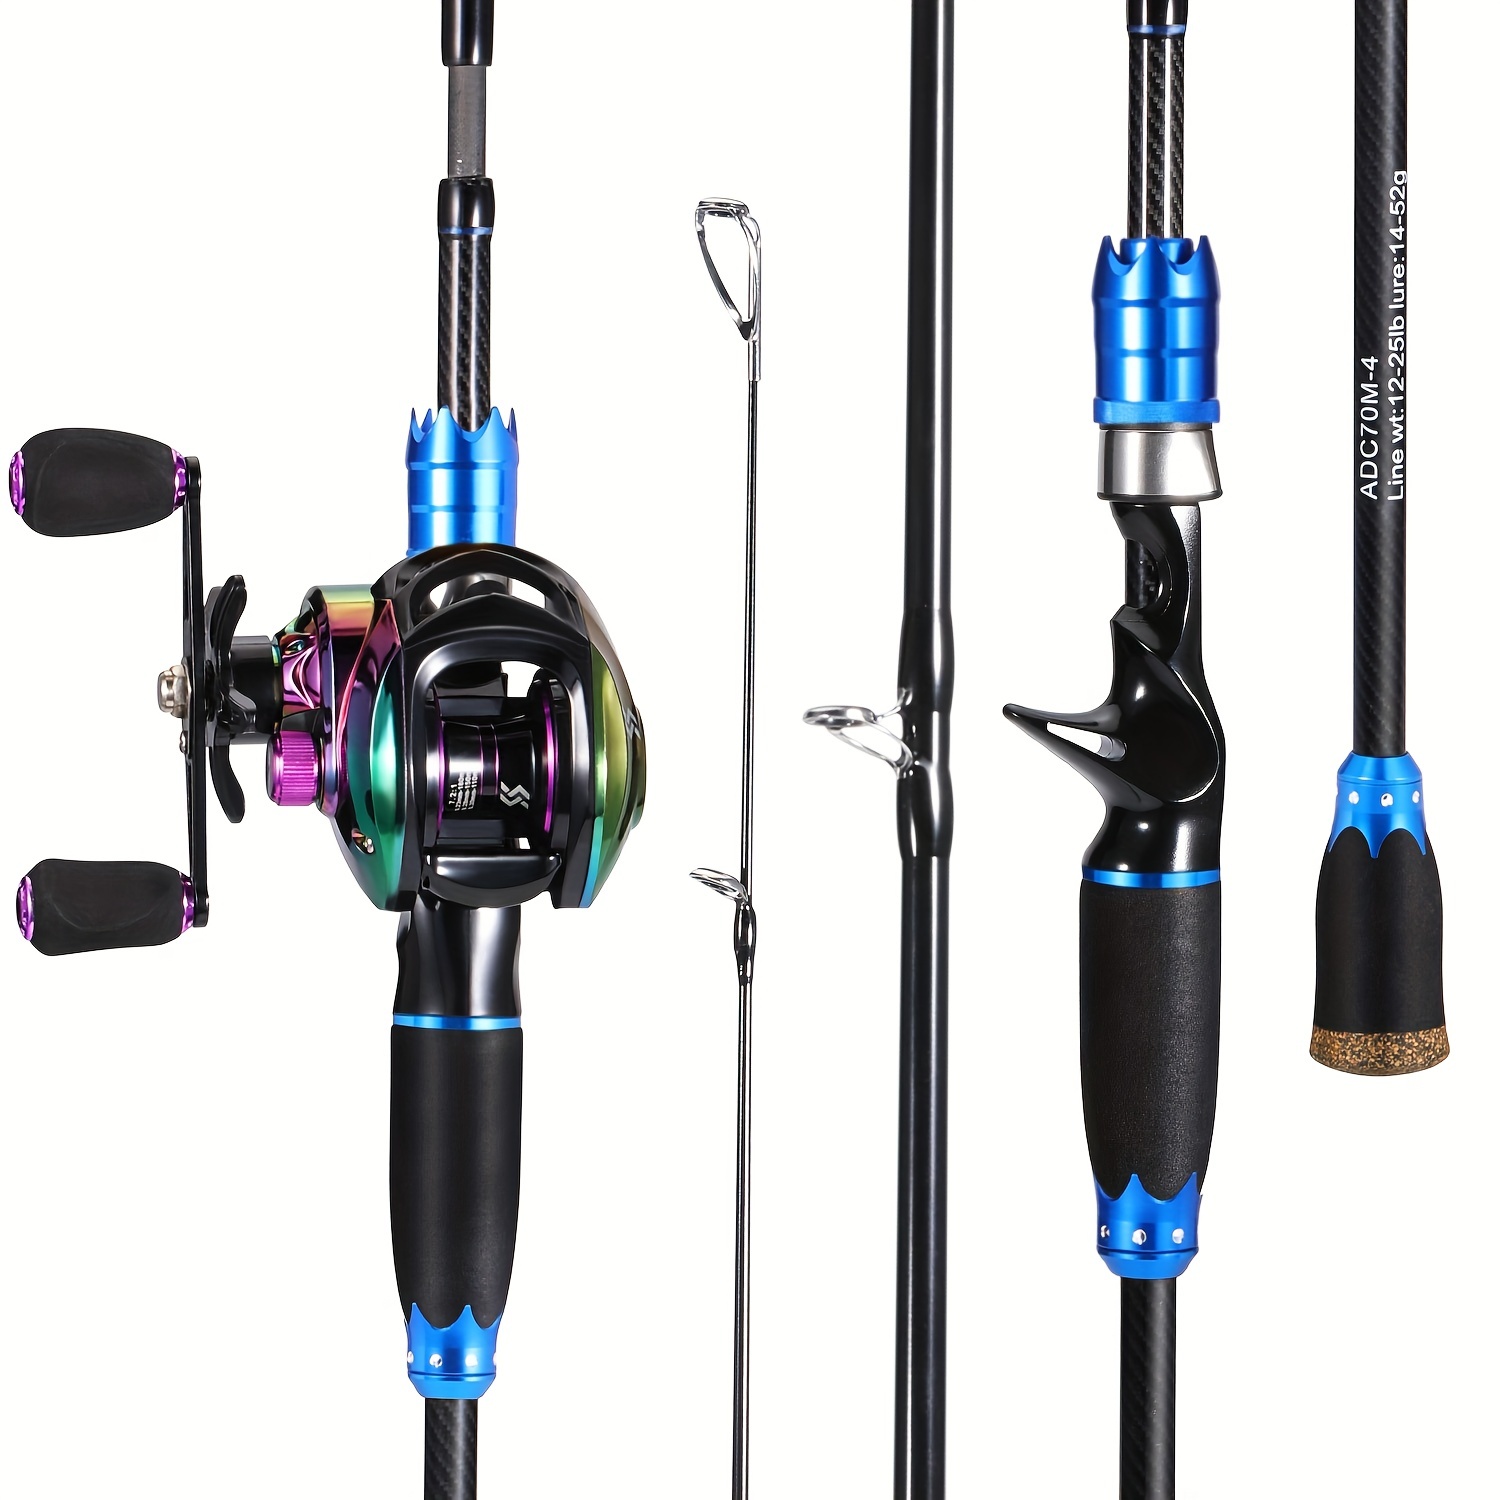 Freshwater Long Throw Fishing Pole Single Rod Straight-Handled Fishing Rods  Fishing Rod and Reel Combo Set with Free Bait Box for New, Rod & Reel  Combos -  Canada